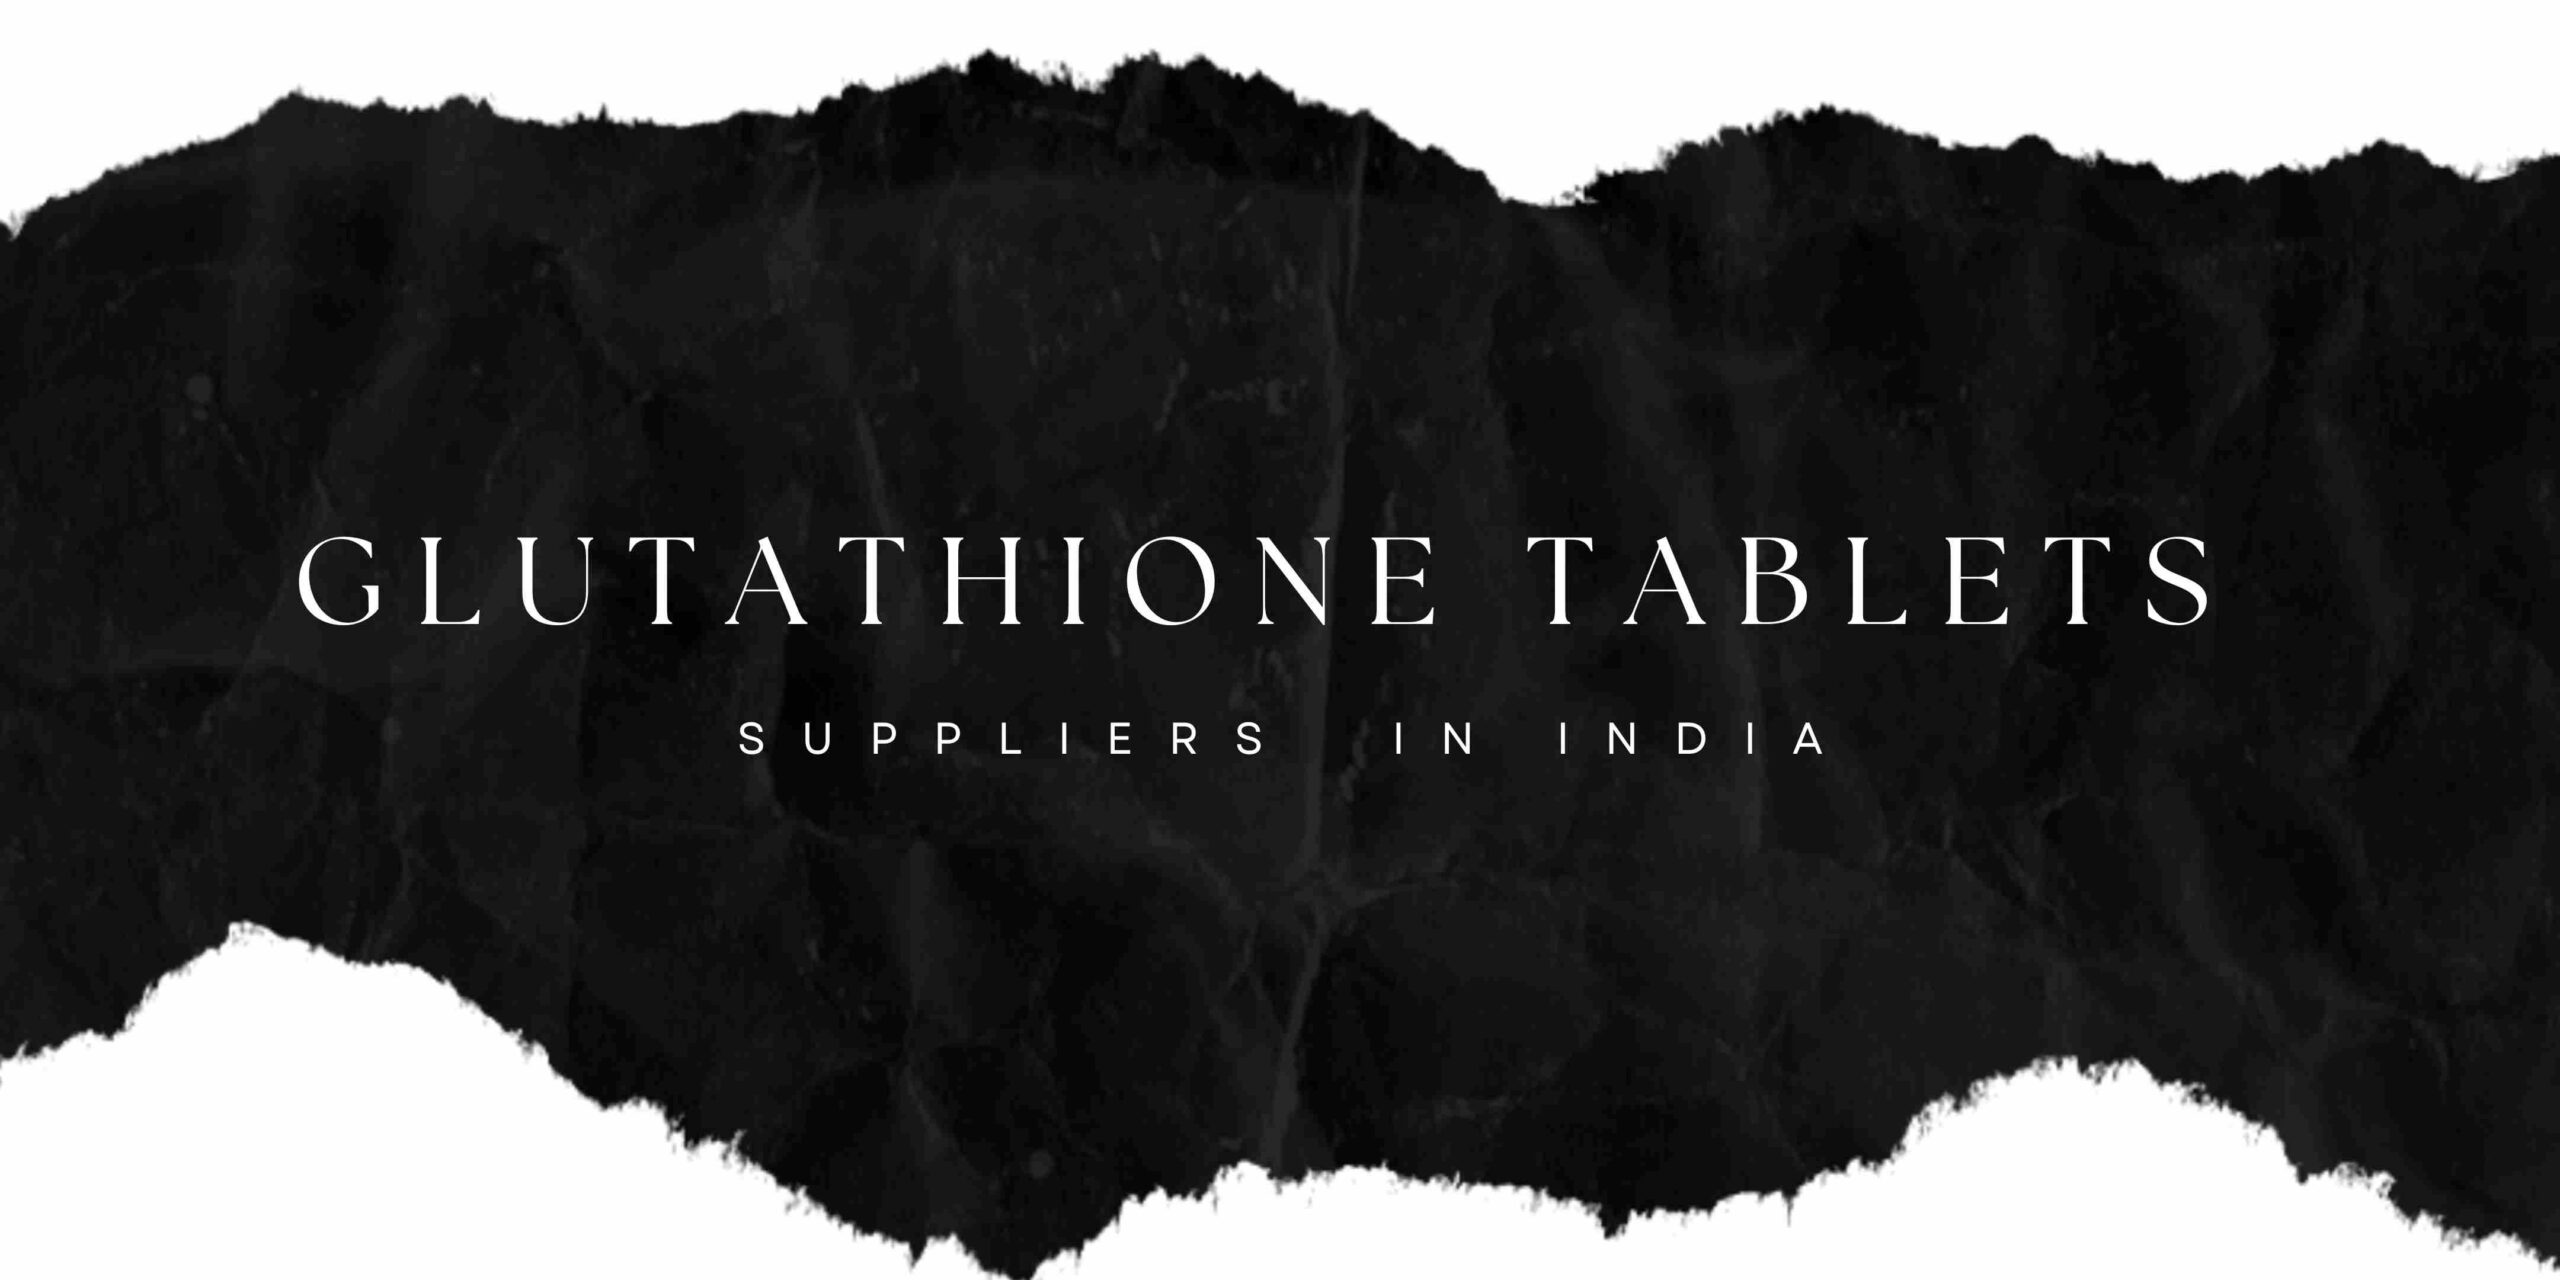 Glutathione Tablet Manufacturers & Suppliers In India